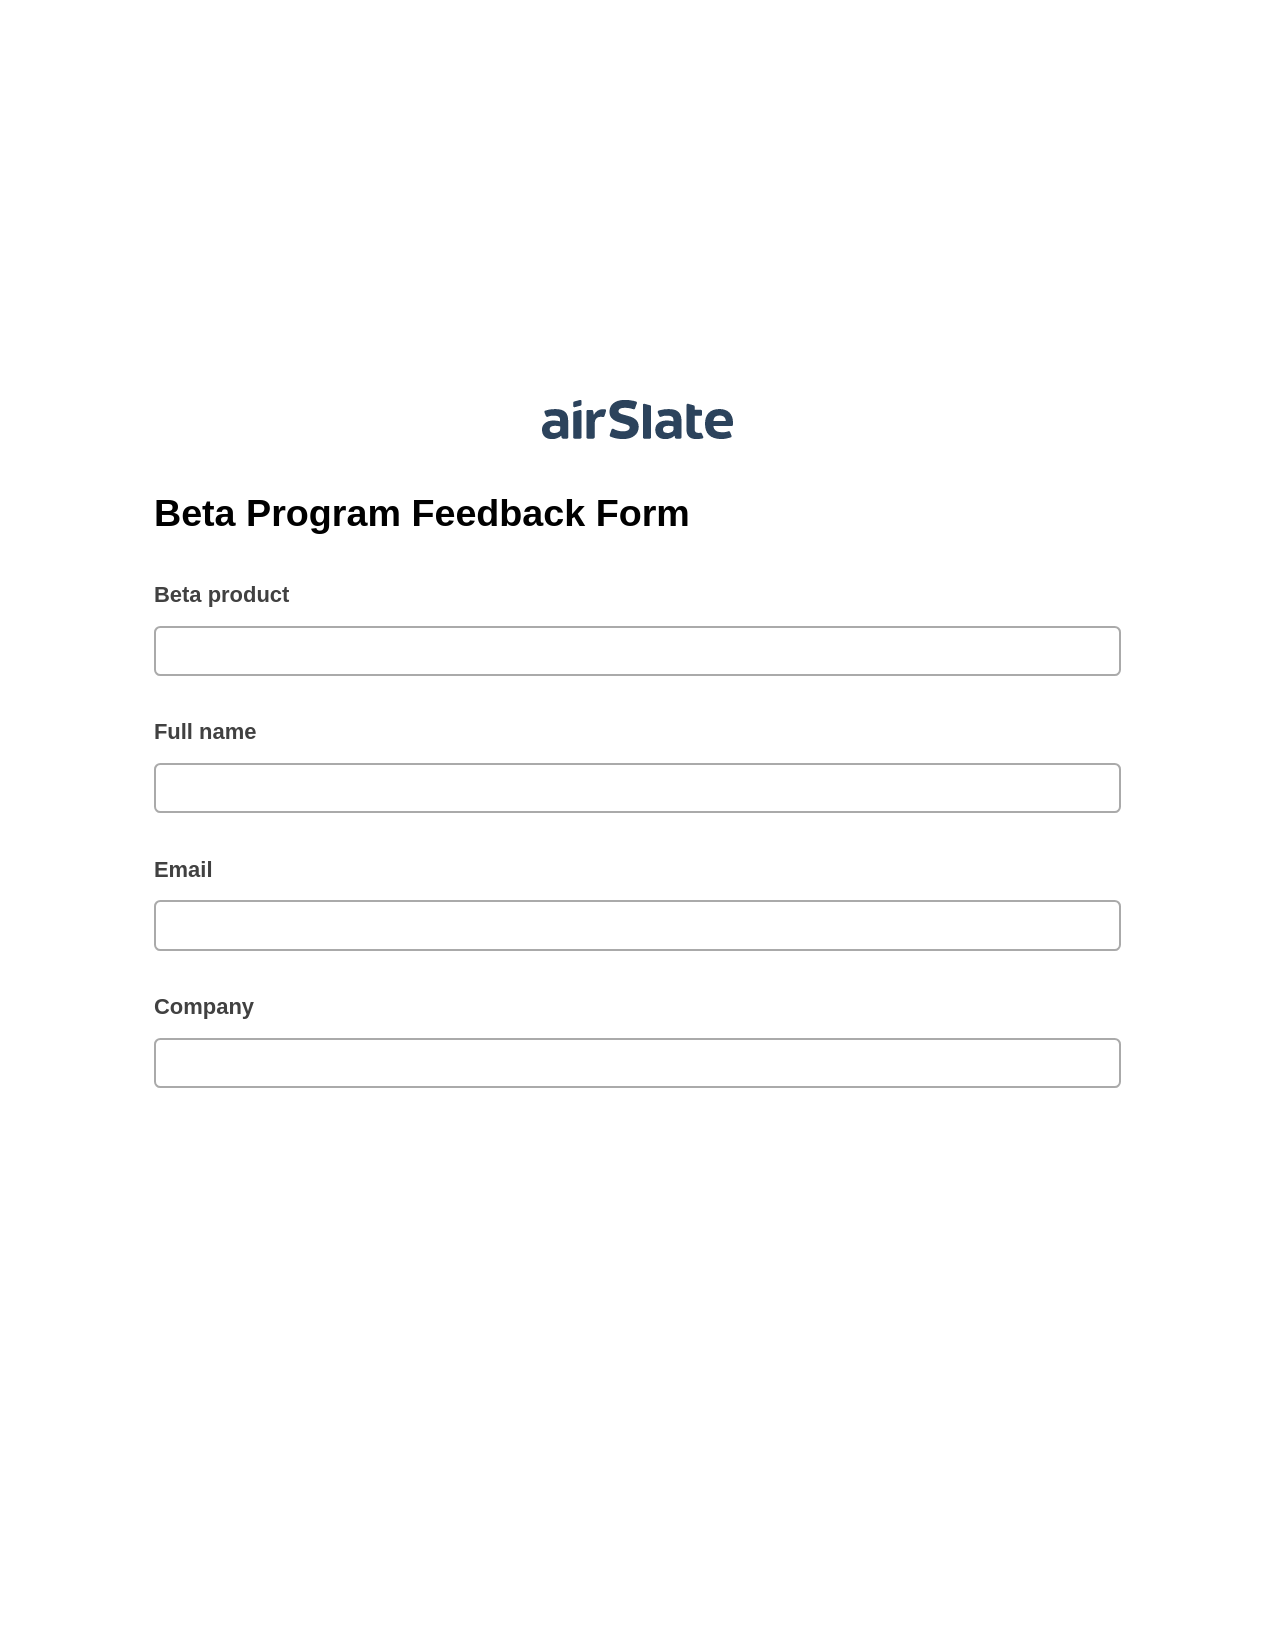 Multirole Beta Program Feedback Form Pre-fill from another Slate Bot, Reminder Bot, Export to Formstack Documents Bot